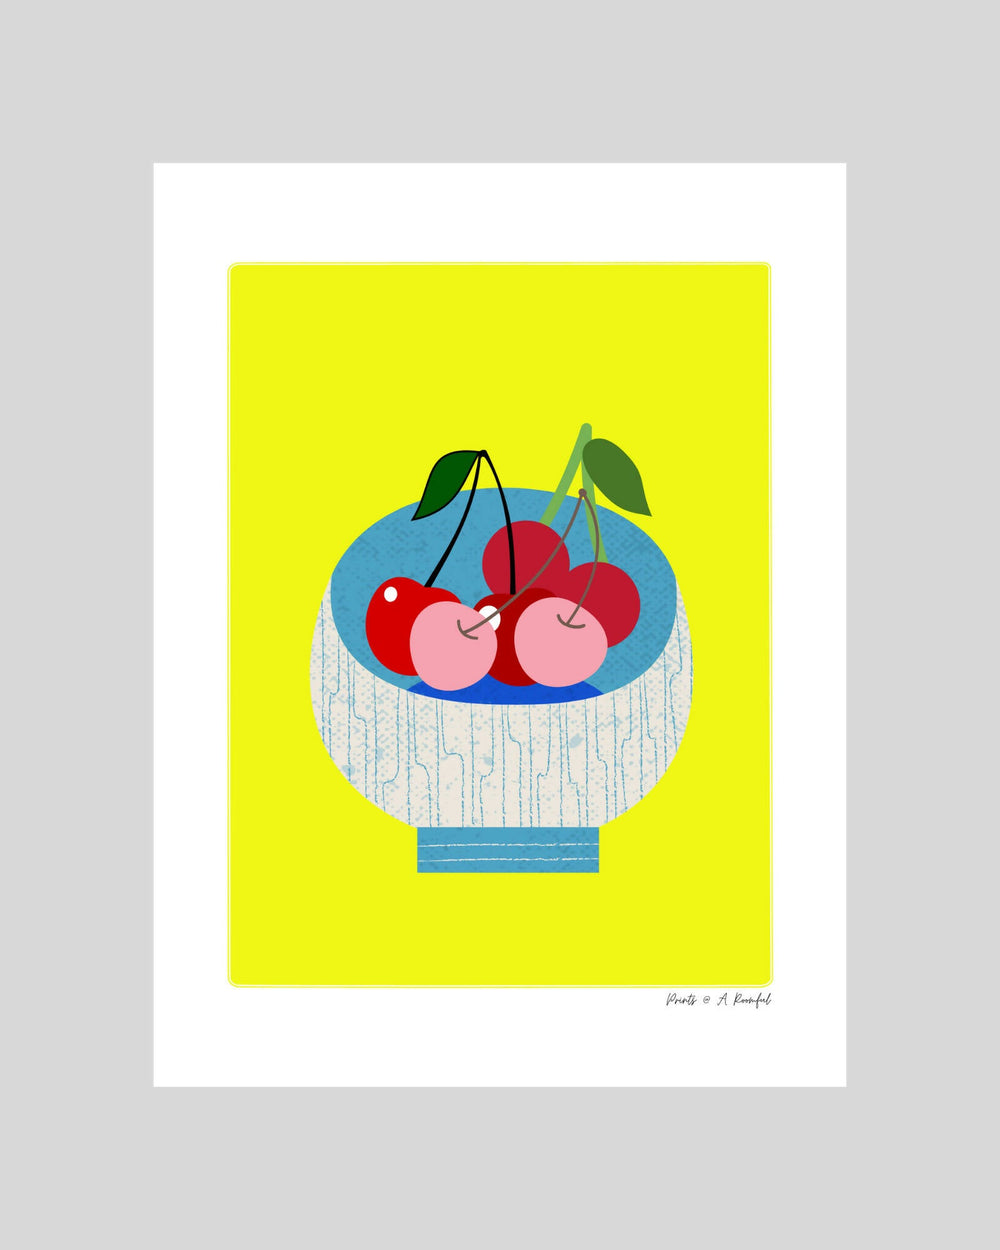 wall art : Iispired by colours and fruits (cherries) Art Prints@ARoomful 